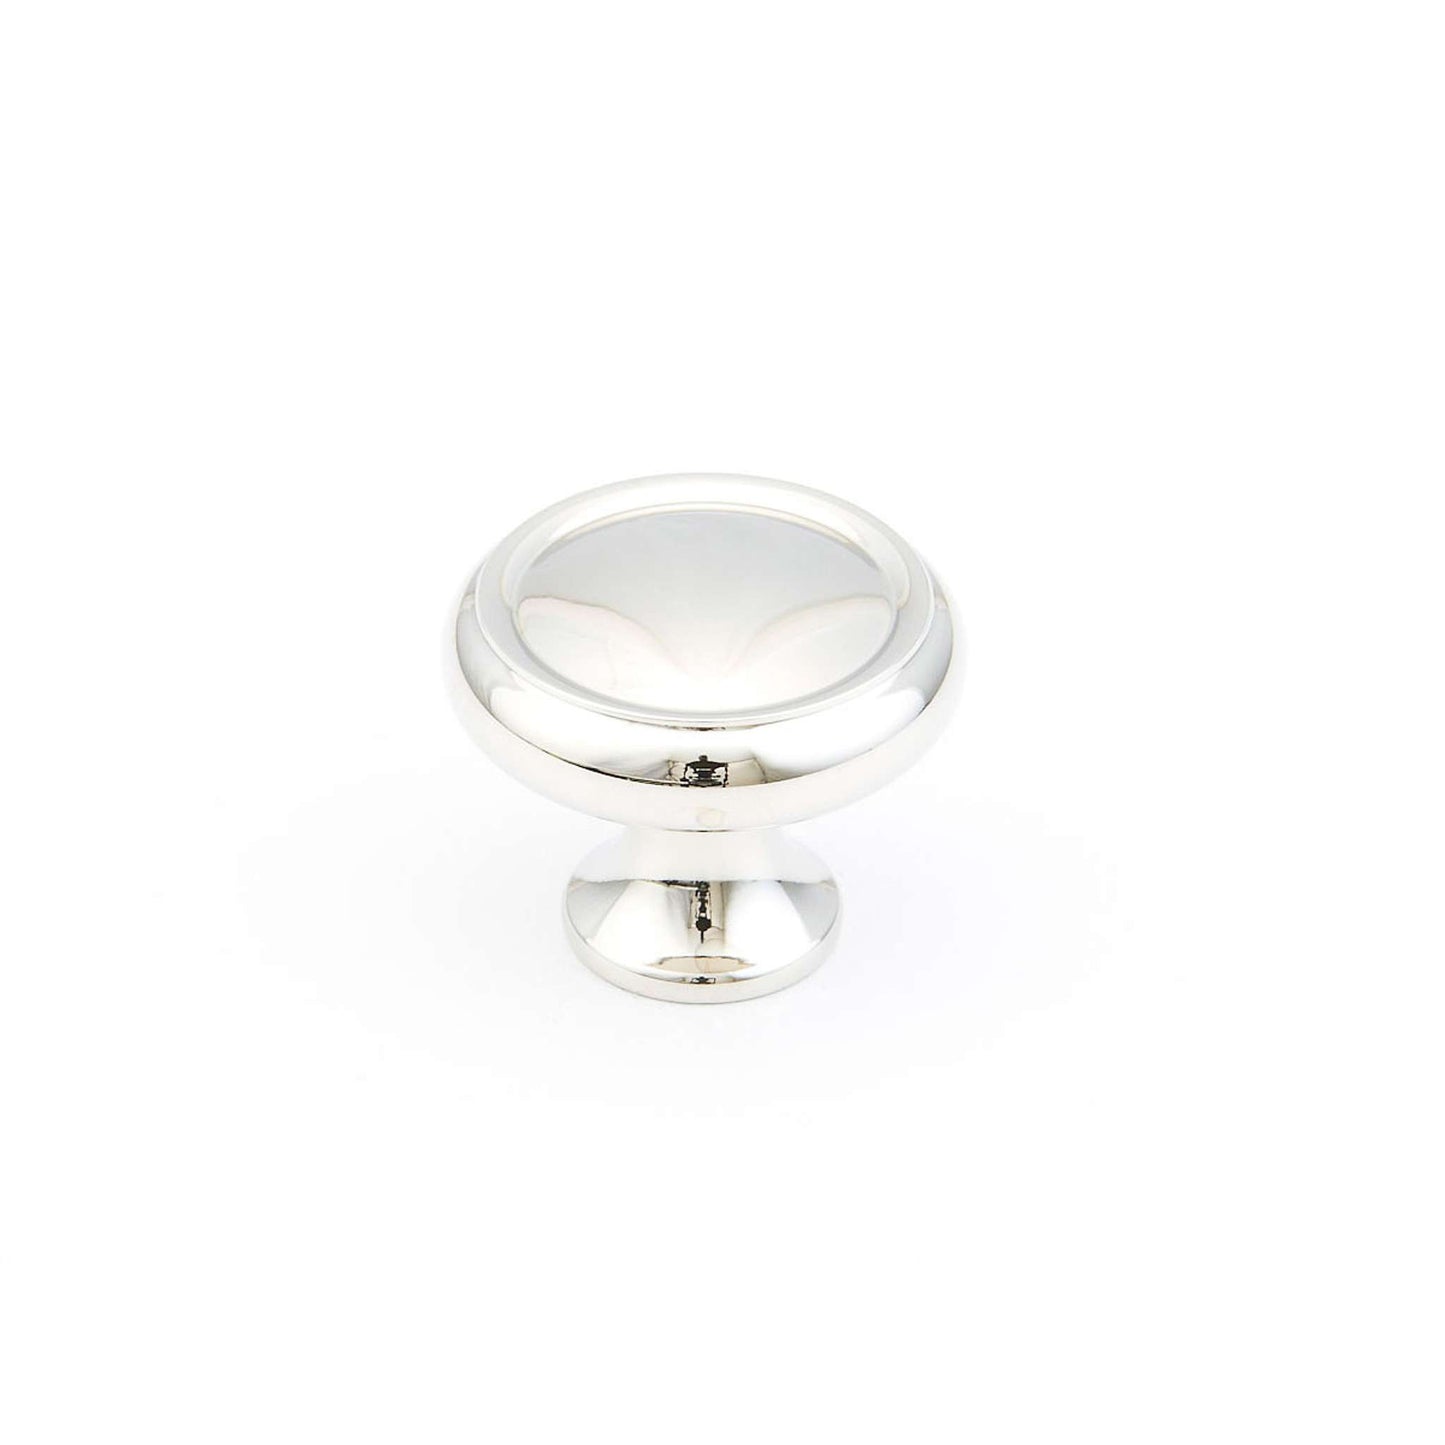 Schaub and Company - Traditional Cabinet Knob Round - Ring